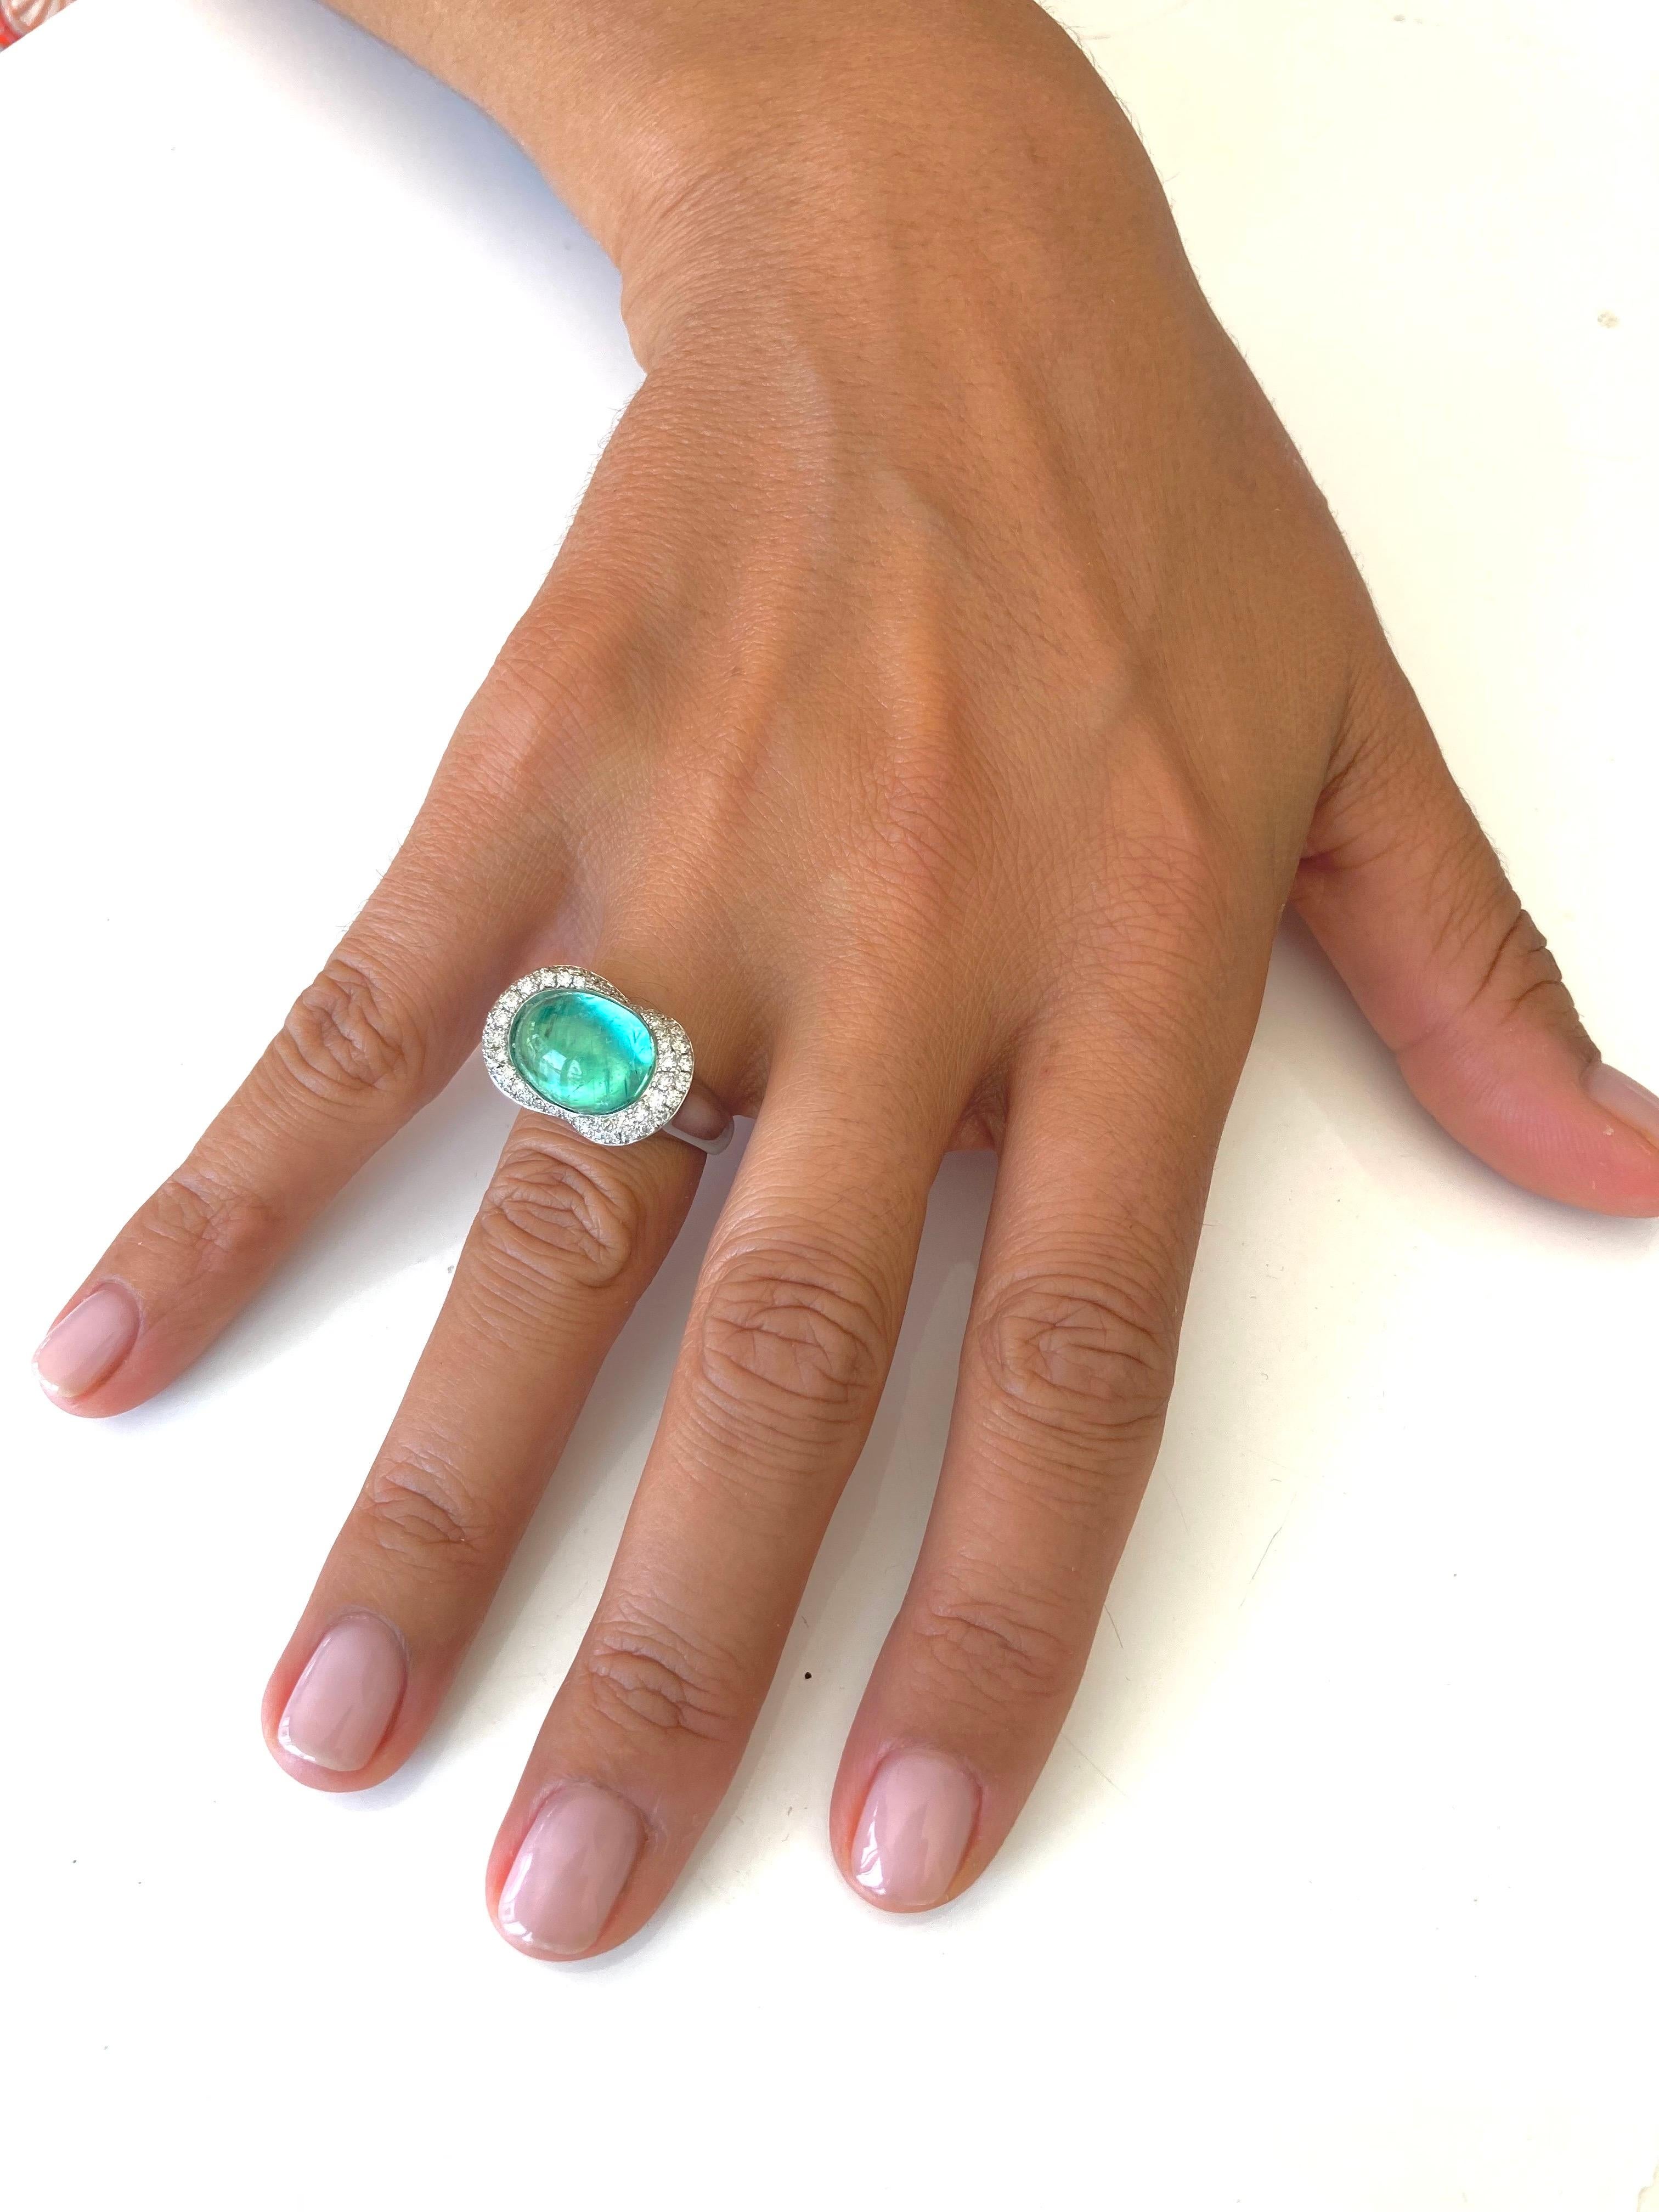 11.53 Grams of white gold nest this beautiful 7.8 Ct Paraiba Tourmaline from Brazil. Recognizable by their inclusions, the rare gem is mounted on a mirror plate which gives it a cat's eye effect.  This design is amazingly comfortable.